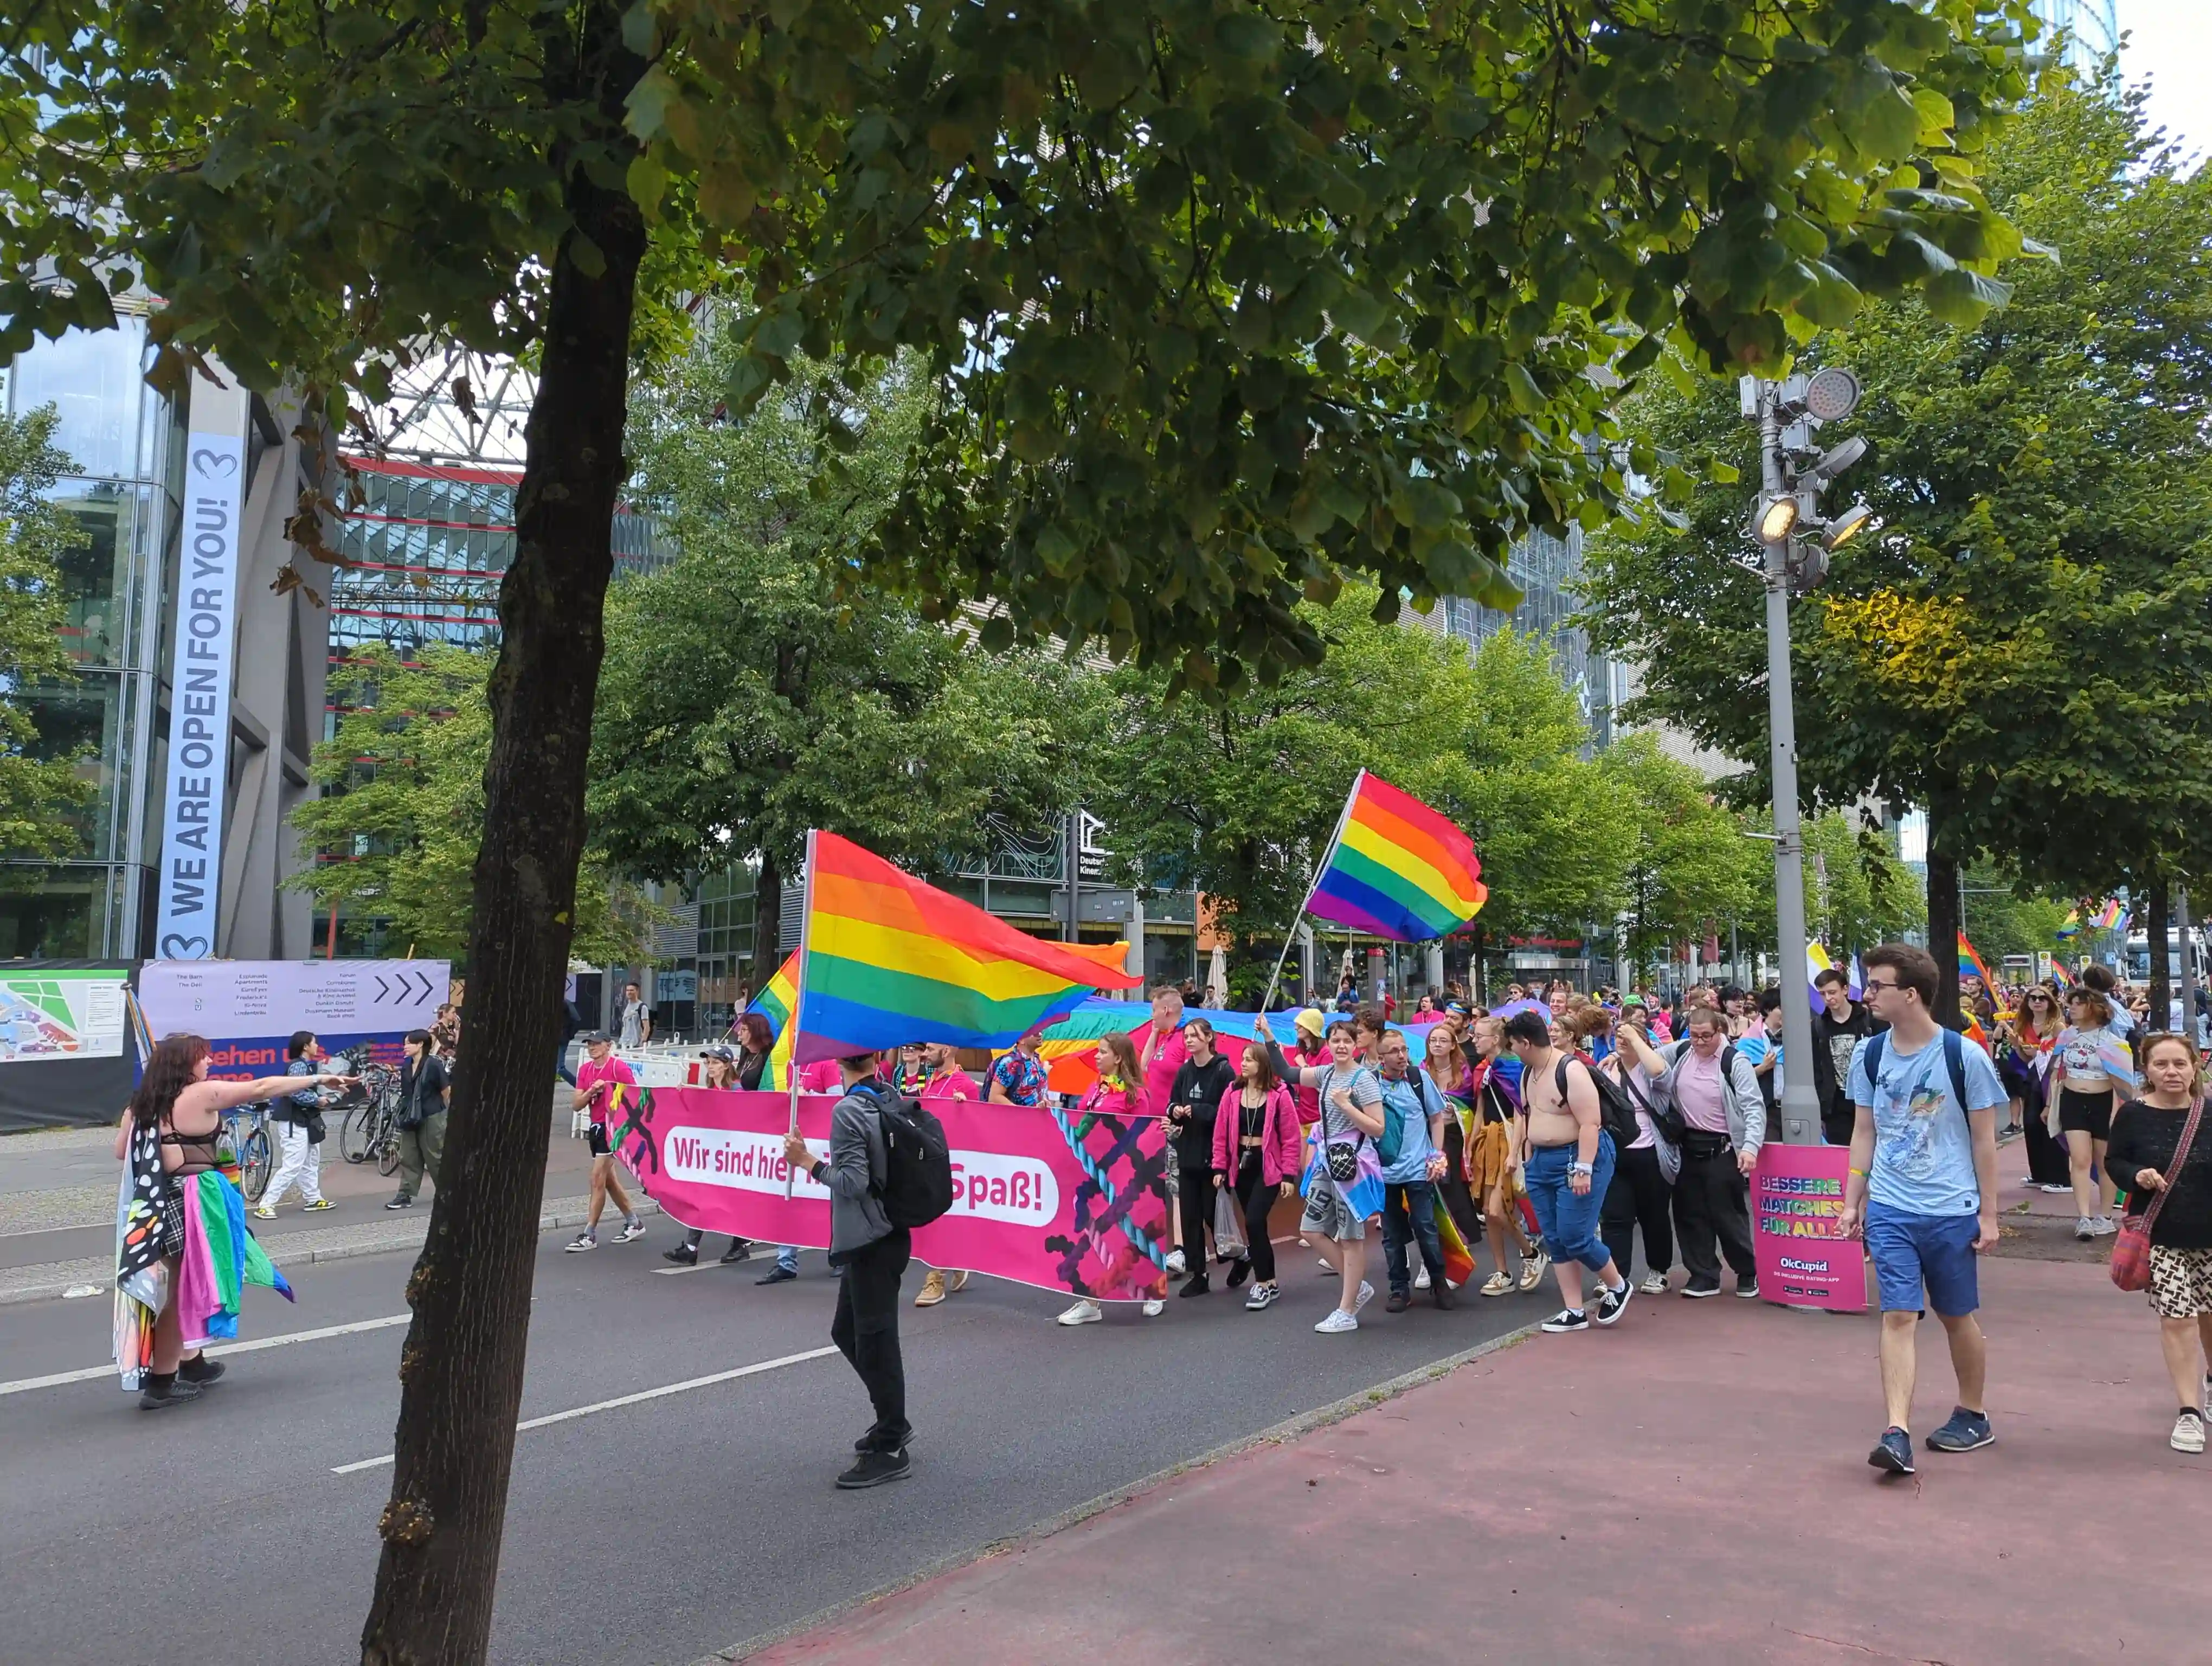 Front of the parade, people are carrying an oversized rainbow flag, and a banner saying "Wir sind hier nicht zum Spaß!"